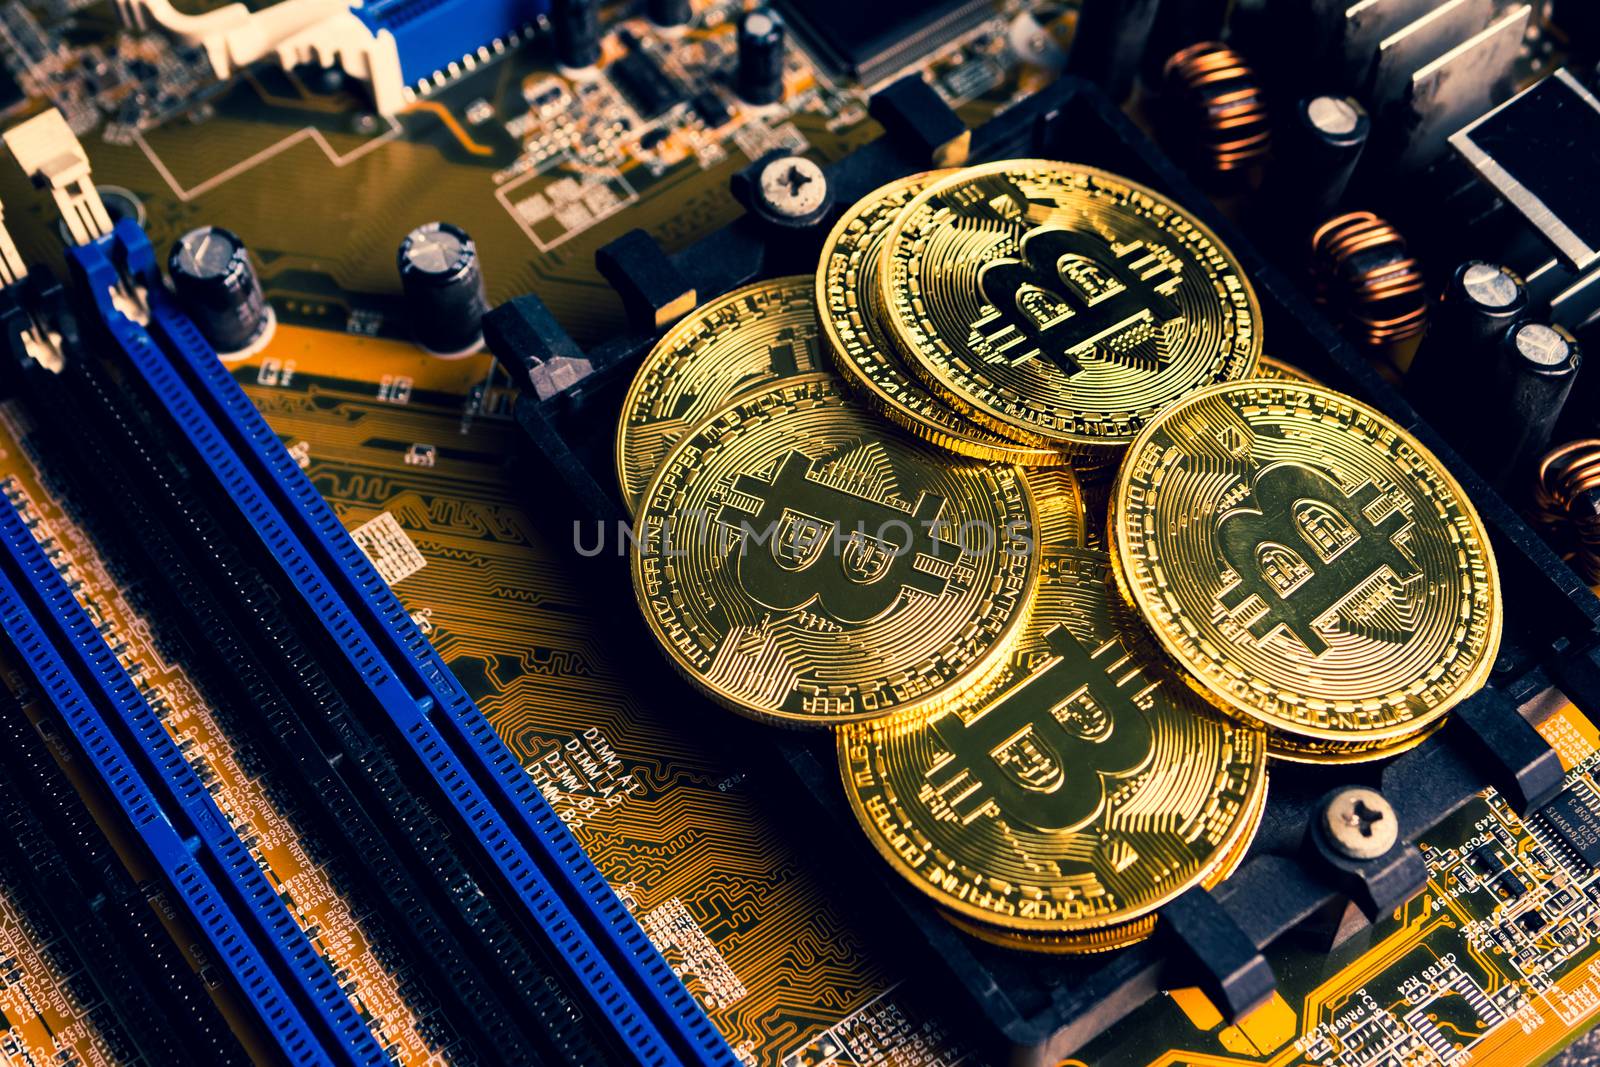 Golden coins with bitcoin symbol on a mainboard.